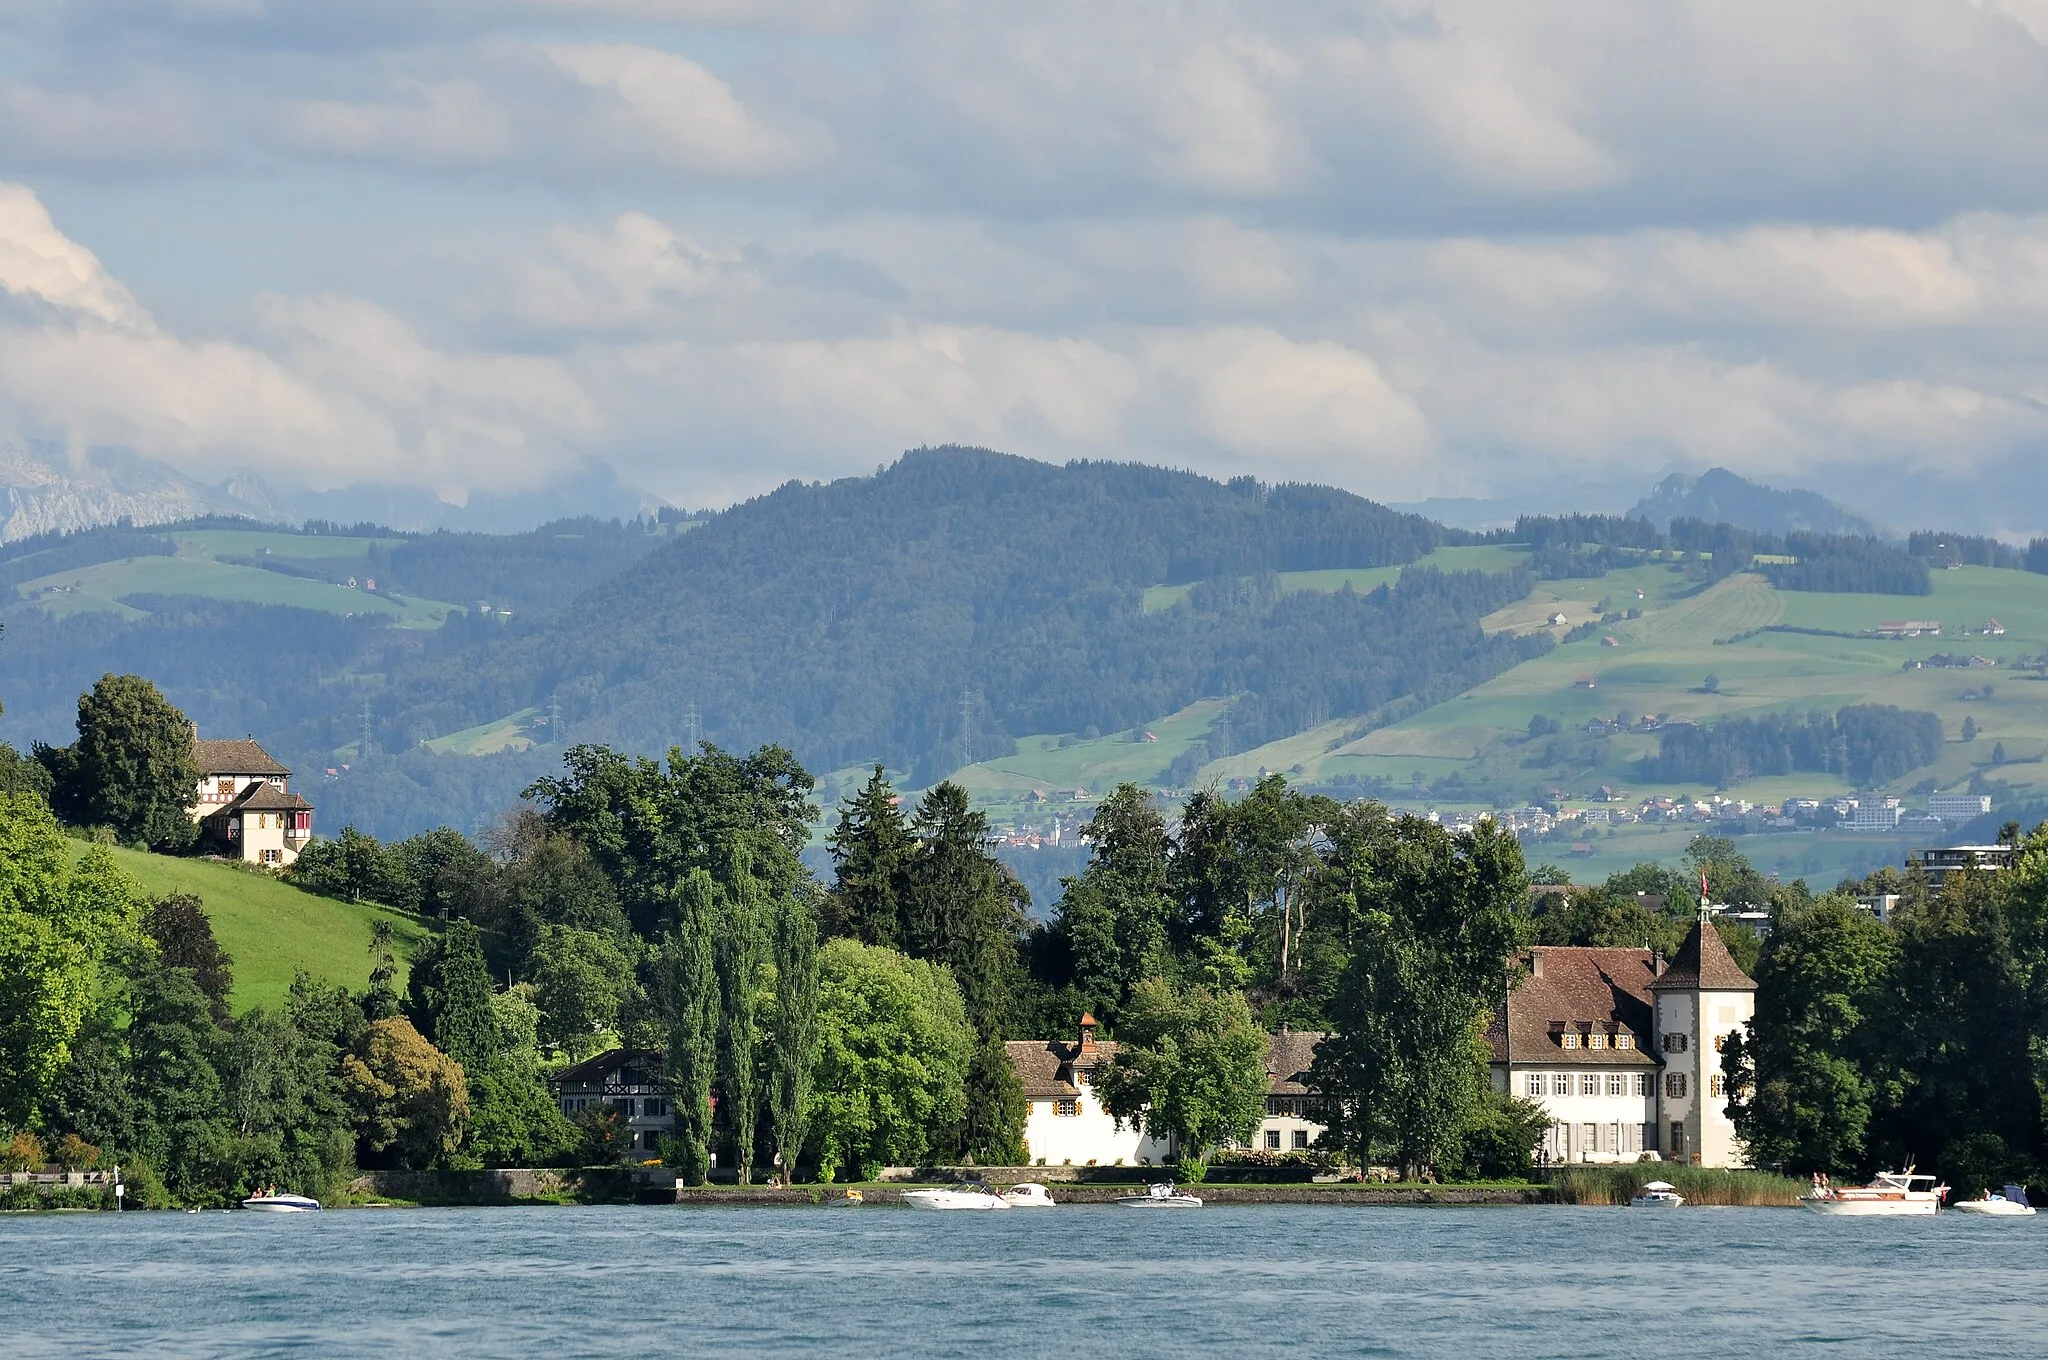 Photo showing: Au peninsula and Werdmüller estate in Au (Switzerland), as seen from ZSG paddle steamship Stadt Rapperswil on Zürichsee, Etzel mountain in the background.